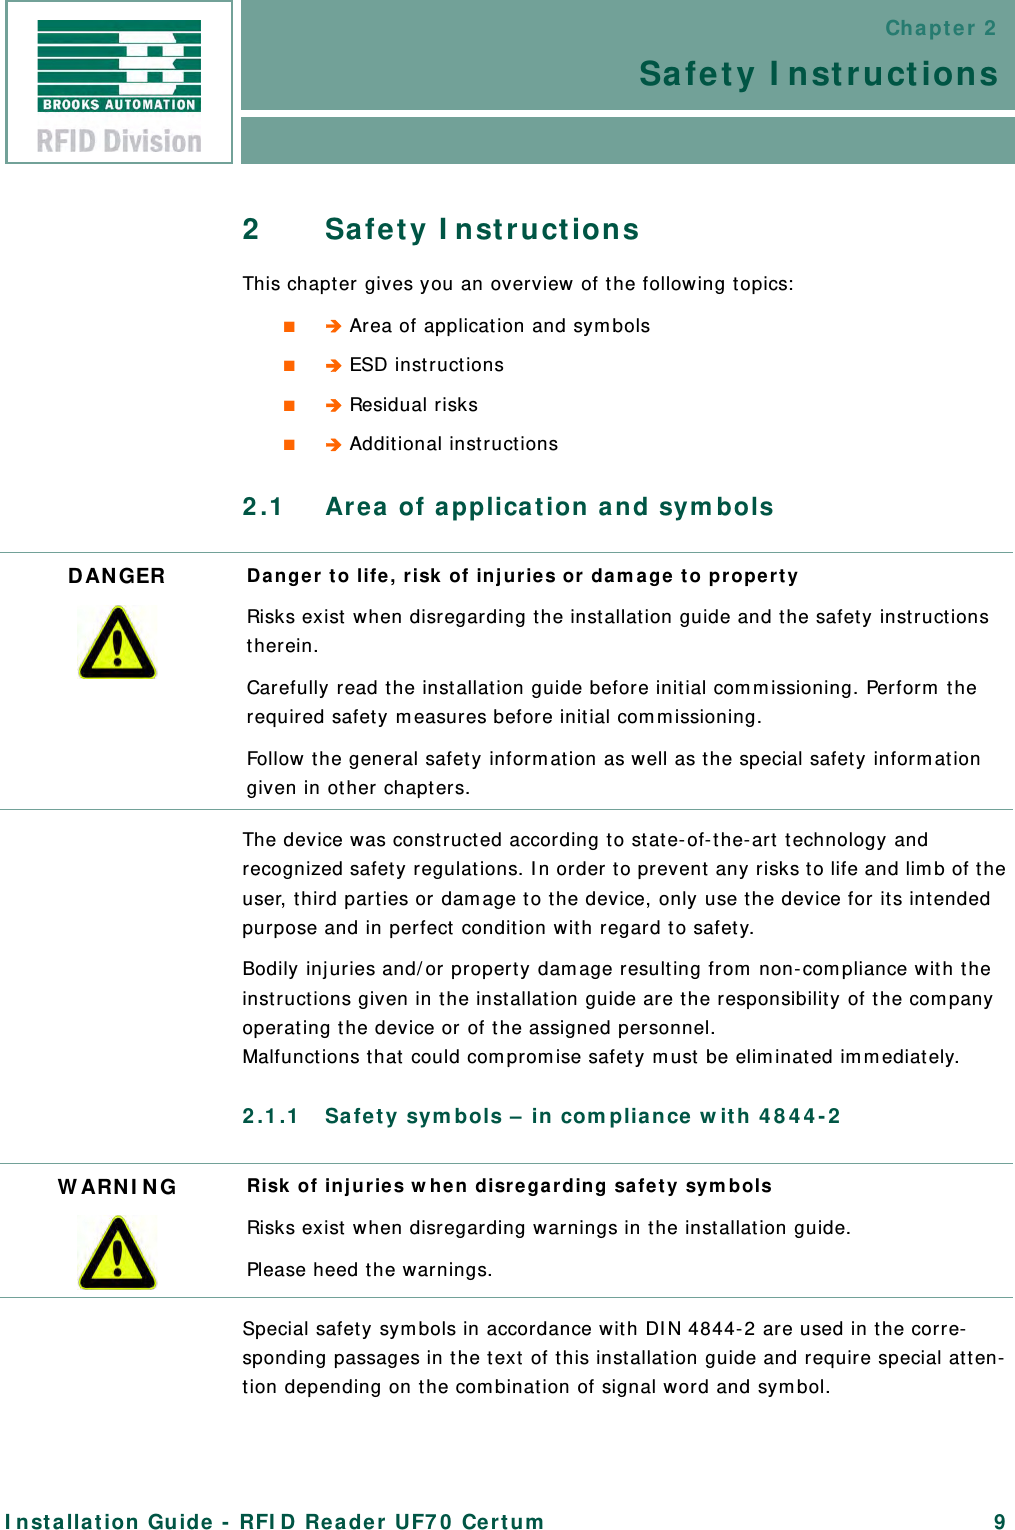 Chapter 2Safety InstructionsInstallation Guide - RFID Reader UF70 Certum 92Safety InstructionsThis chapter gives you an overview of the following topics:■ Area of application and symbols■ ESD instructions■ Residual risks■ Additional instructions2.1 Area of application and symbolsThe device was constructed according to state-of-the-art technology and recognized safety regulations. In order to prevent any risks to life and limb of the user, third parties or damage to the device, only use the device for its intended purpose and in perfect condition with regard to safety.Bodily injuries and/or property damage resulting from non-compliance with the instructions given in the installation guide are the responsibility of the company operating the device or of the assigned personnel.Malfunctions that could compromise safety must be eliminated immediately.2.1.1 Safety symbols – in compliance with 4844-2Special safety symbols in accordance with DIN 4844-2 are used in the corre-sponding passages in the text of this installation guide and require special atten-tion depending on the combination of signal word and symbol.DANGER Danger to life, risk of injuries or damage to propertyRisks exist when disregarding the installation guide and the safety instructions therein.Carefully read the installation guide before initial commissioning. Perform the required safety measures before initial commissioning.Follow the general safety information as well as the special safety information given in other chapters.WARNING Risk of injuries when disregarding safety symbolsRisks exist when disregarding warnings in the installation guide.Please heed the warnings.